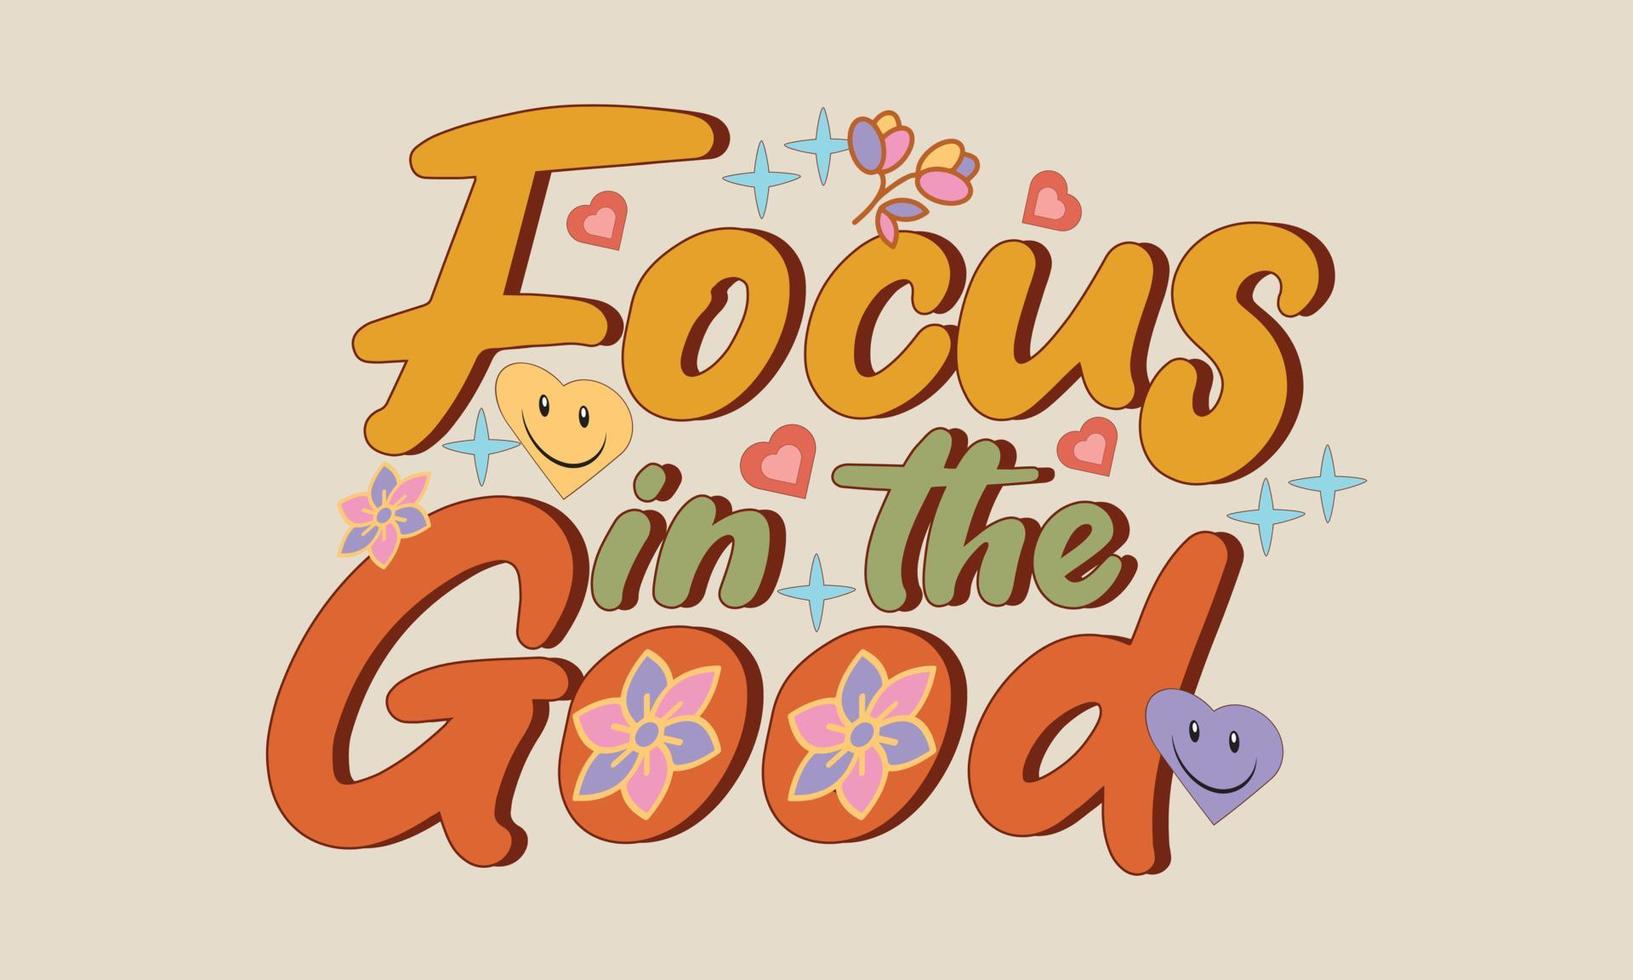 Focus on the good. Positive inspirational quote T-shirt Design for fashion, textile, shirts, prints, posters, stickers, labels, graphics and others use vector